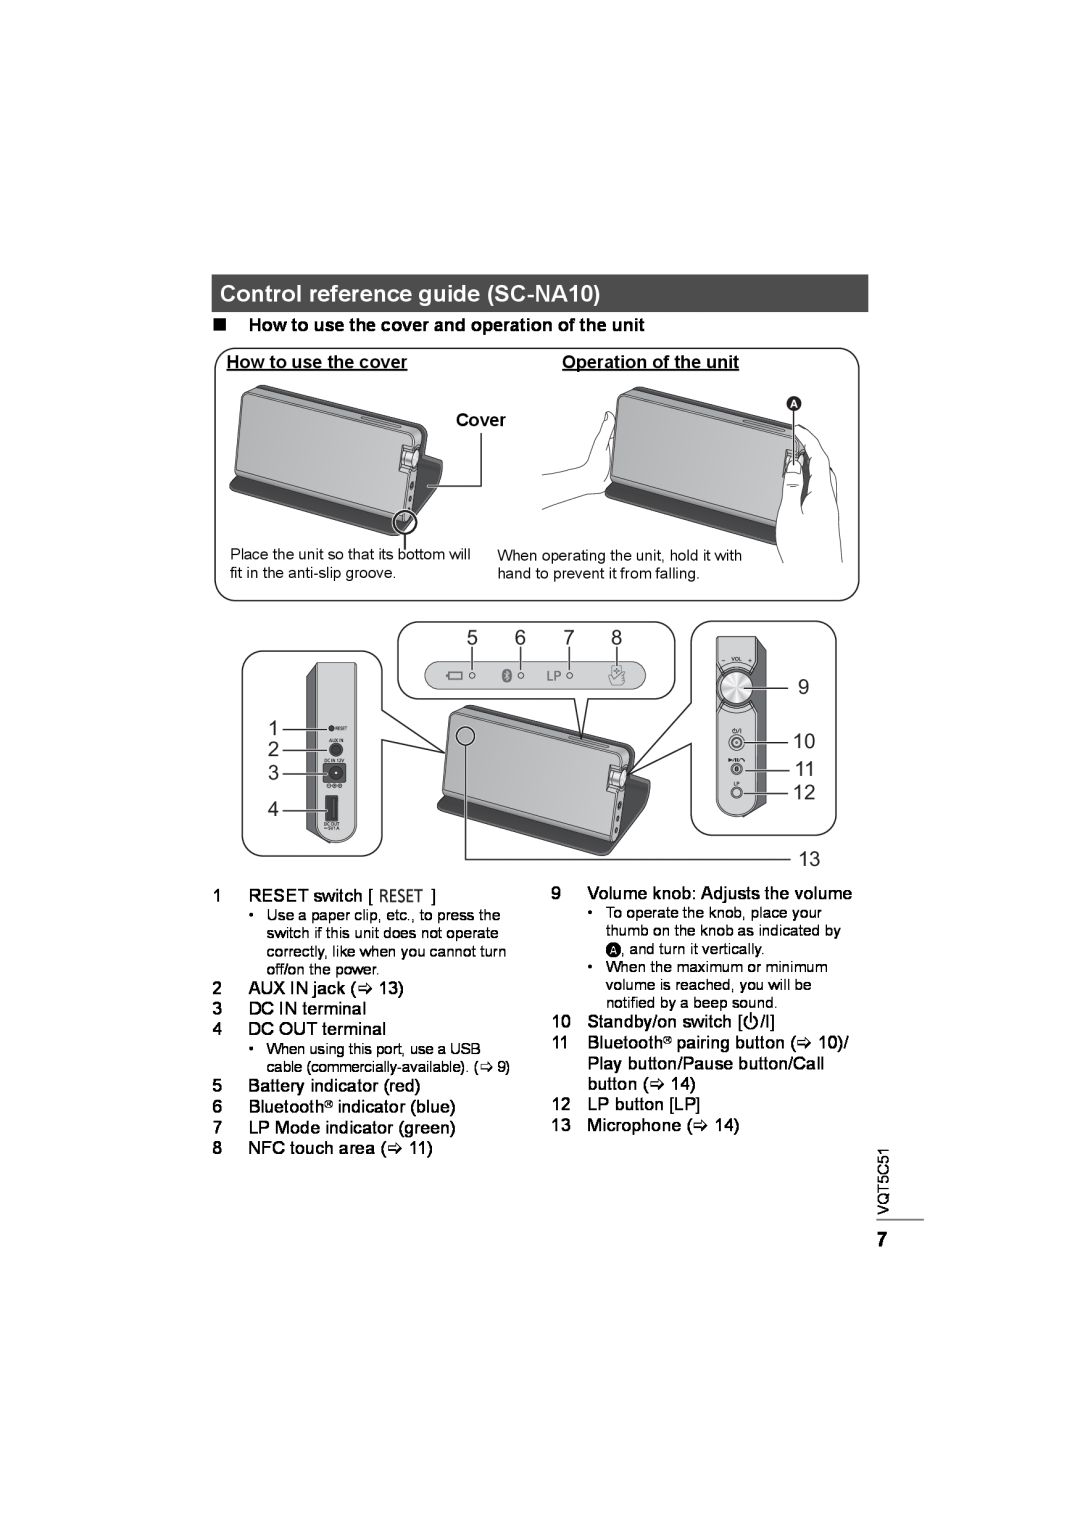 Panasonic SC-NA30/SC-NA10 manual Control reference guide SC-NA10, How to use the cover and operation of the unit, Cover  